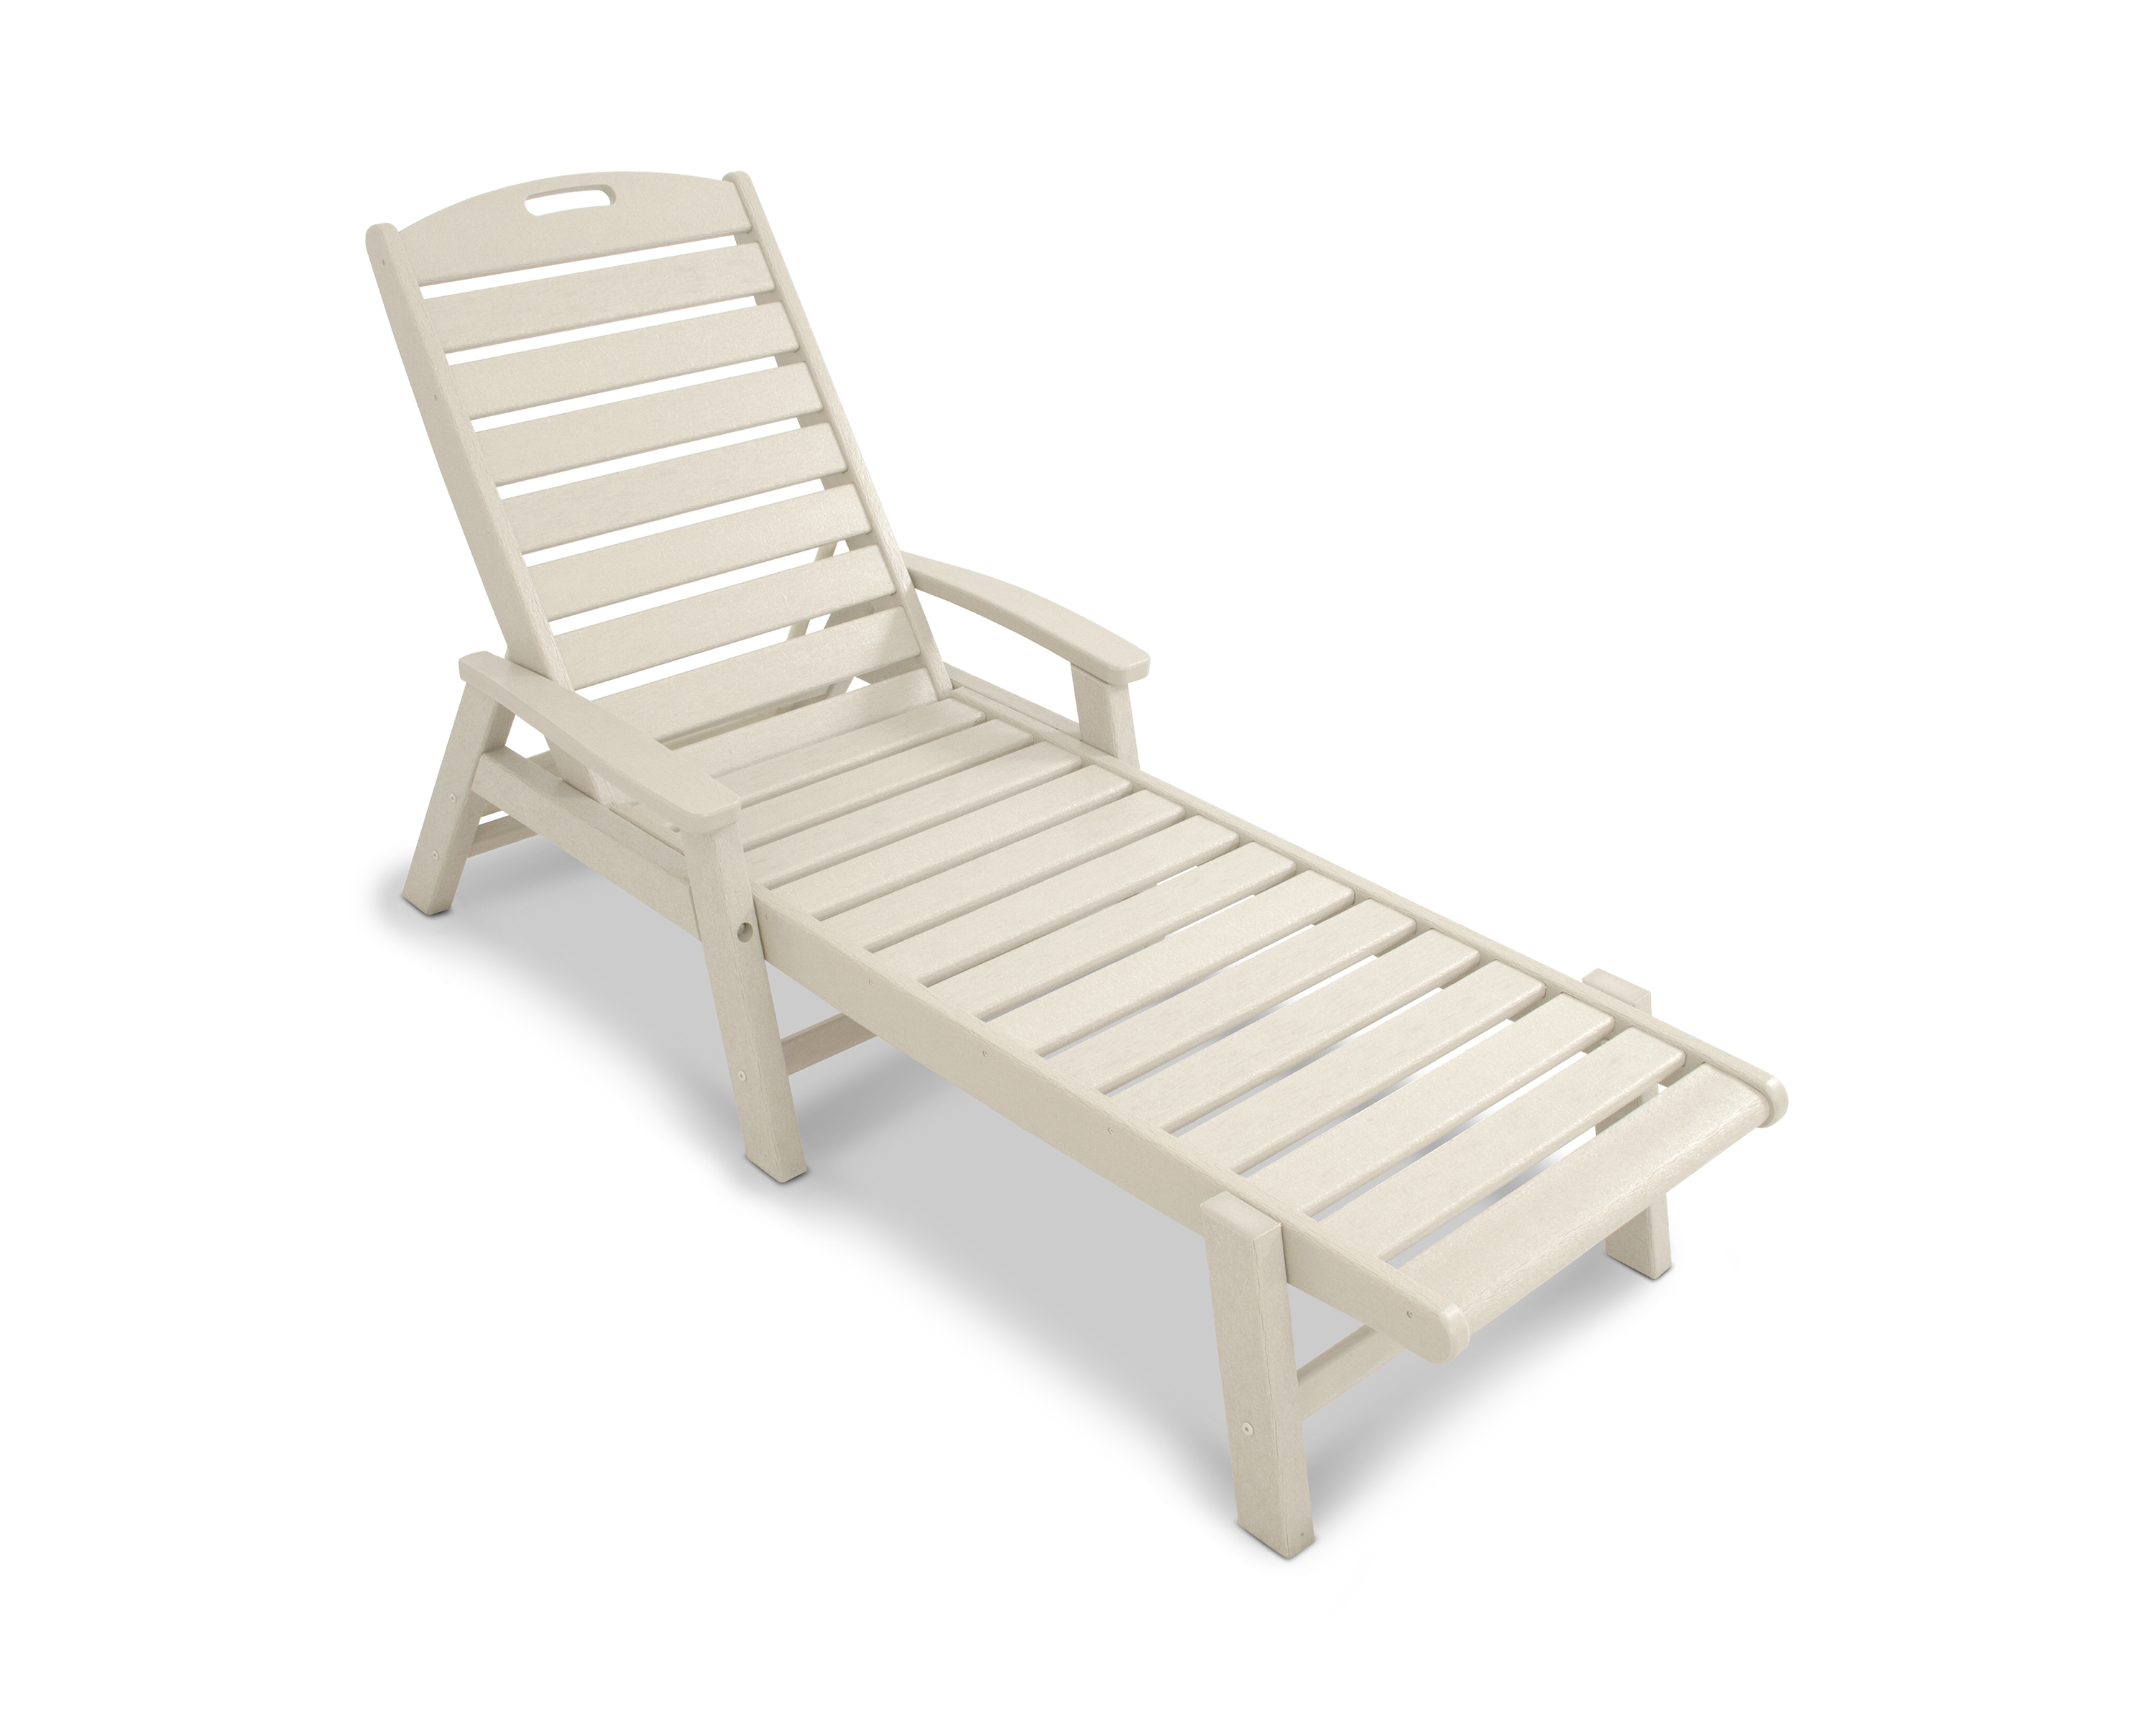 TrexÂ® Outdoor Furnitureâ„¢ Yacht Club Stackable Chaise with Arms